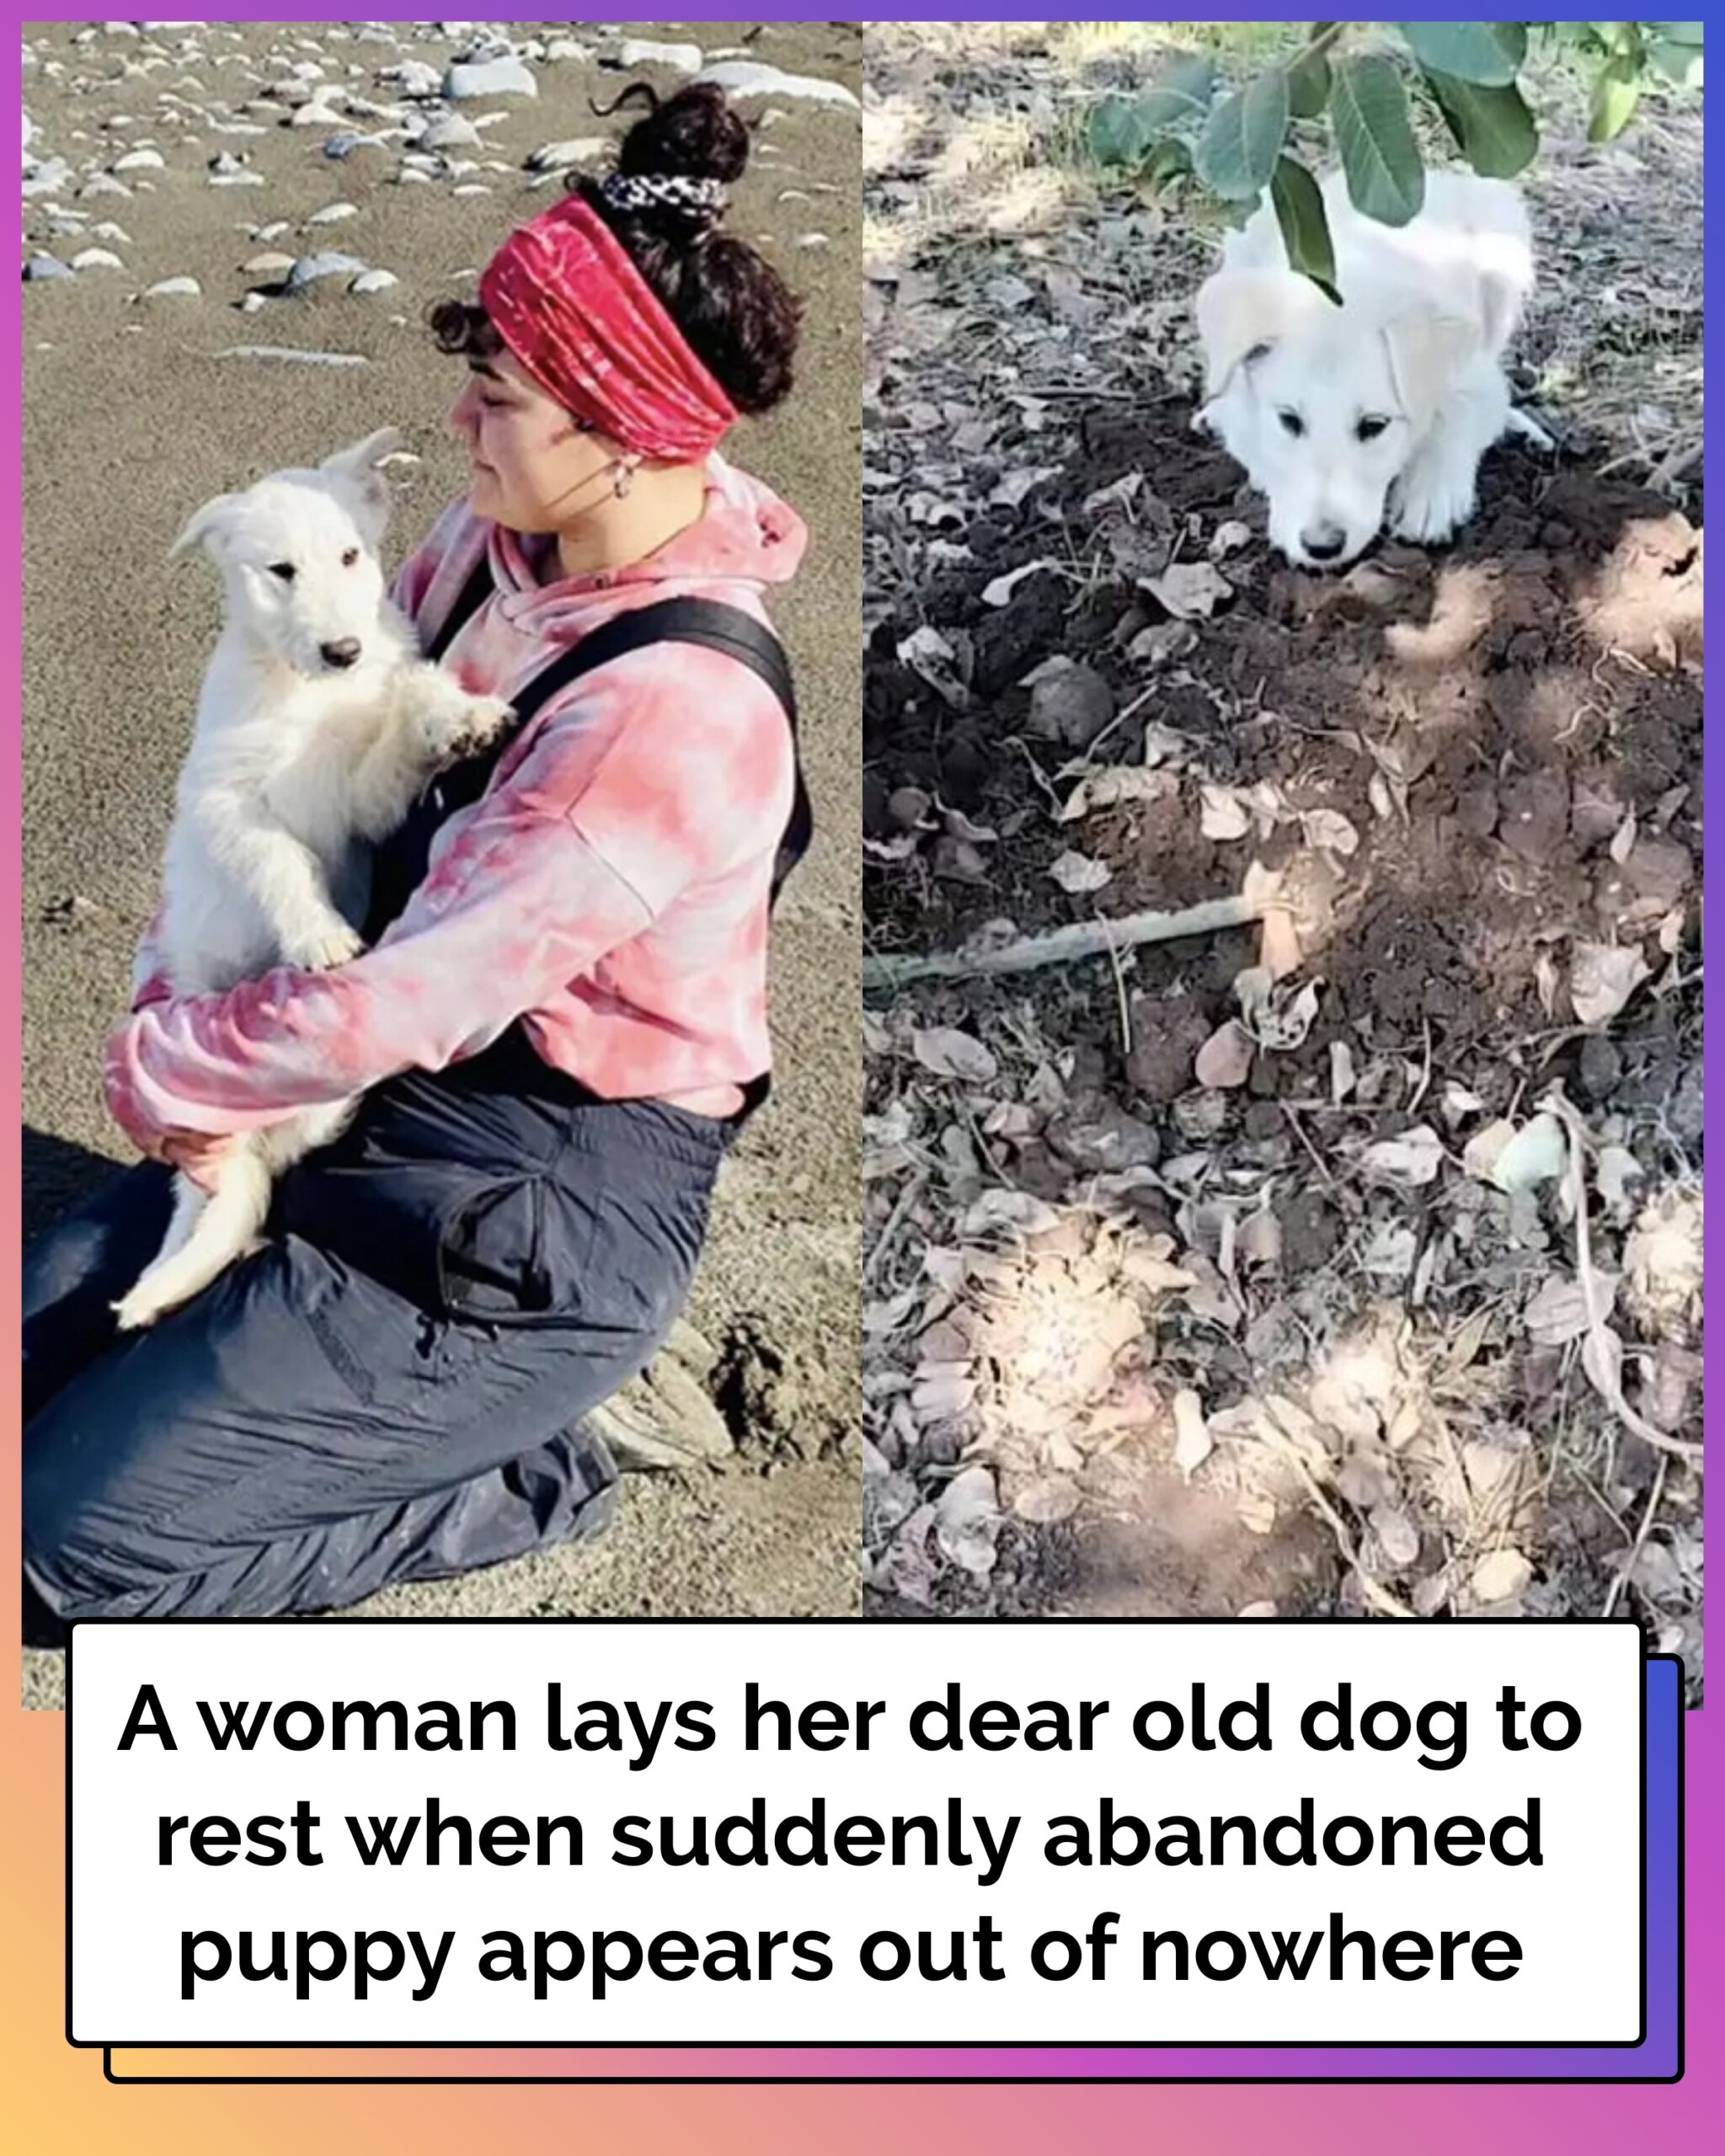 A Woman Lays Her Dear Old Dog To Rest When Suddenly Abandoned Puppy Appears Out Of Nowhere